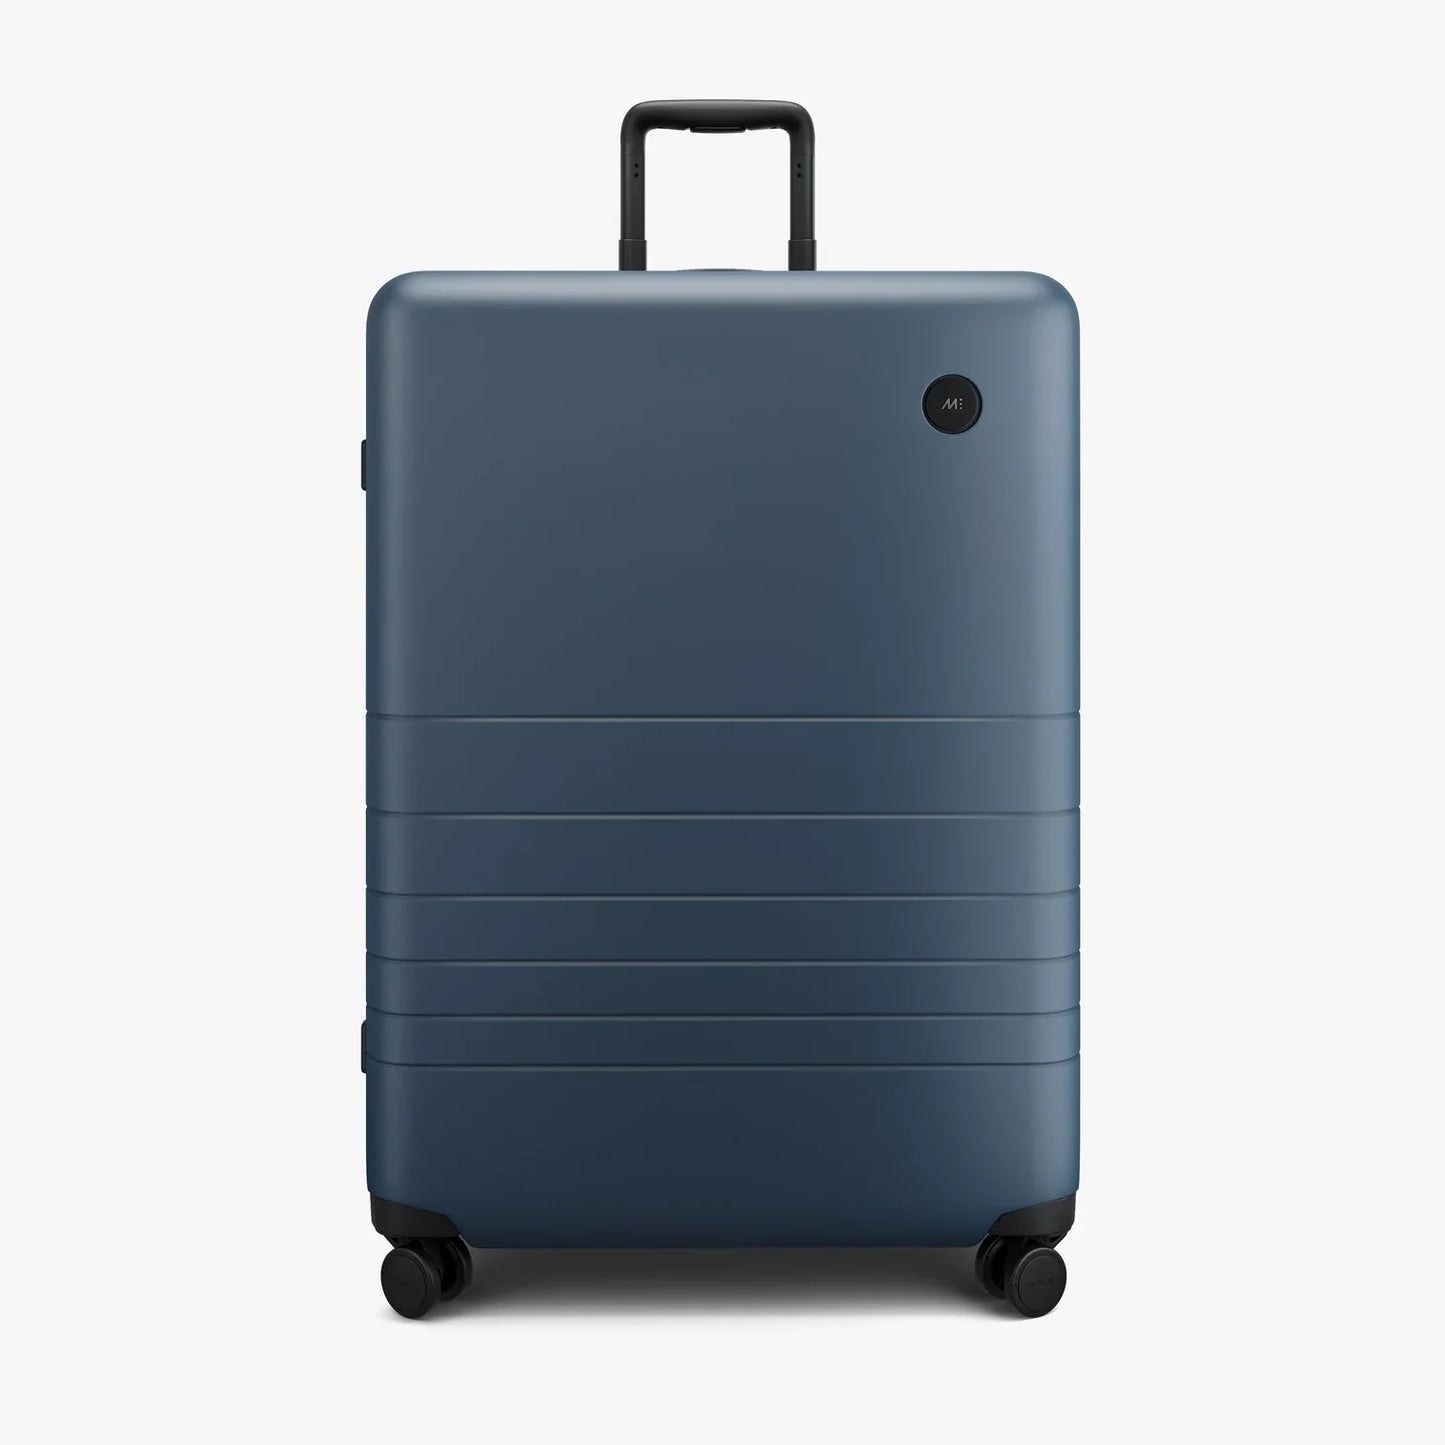 Monos Check-In Large Luggage - Ocean Blue